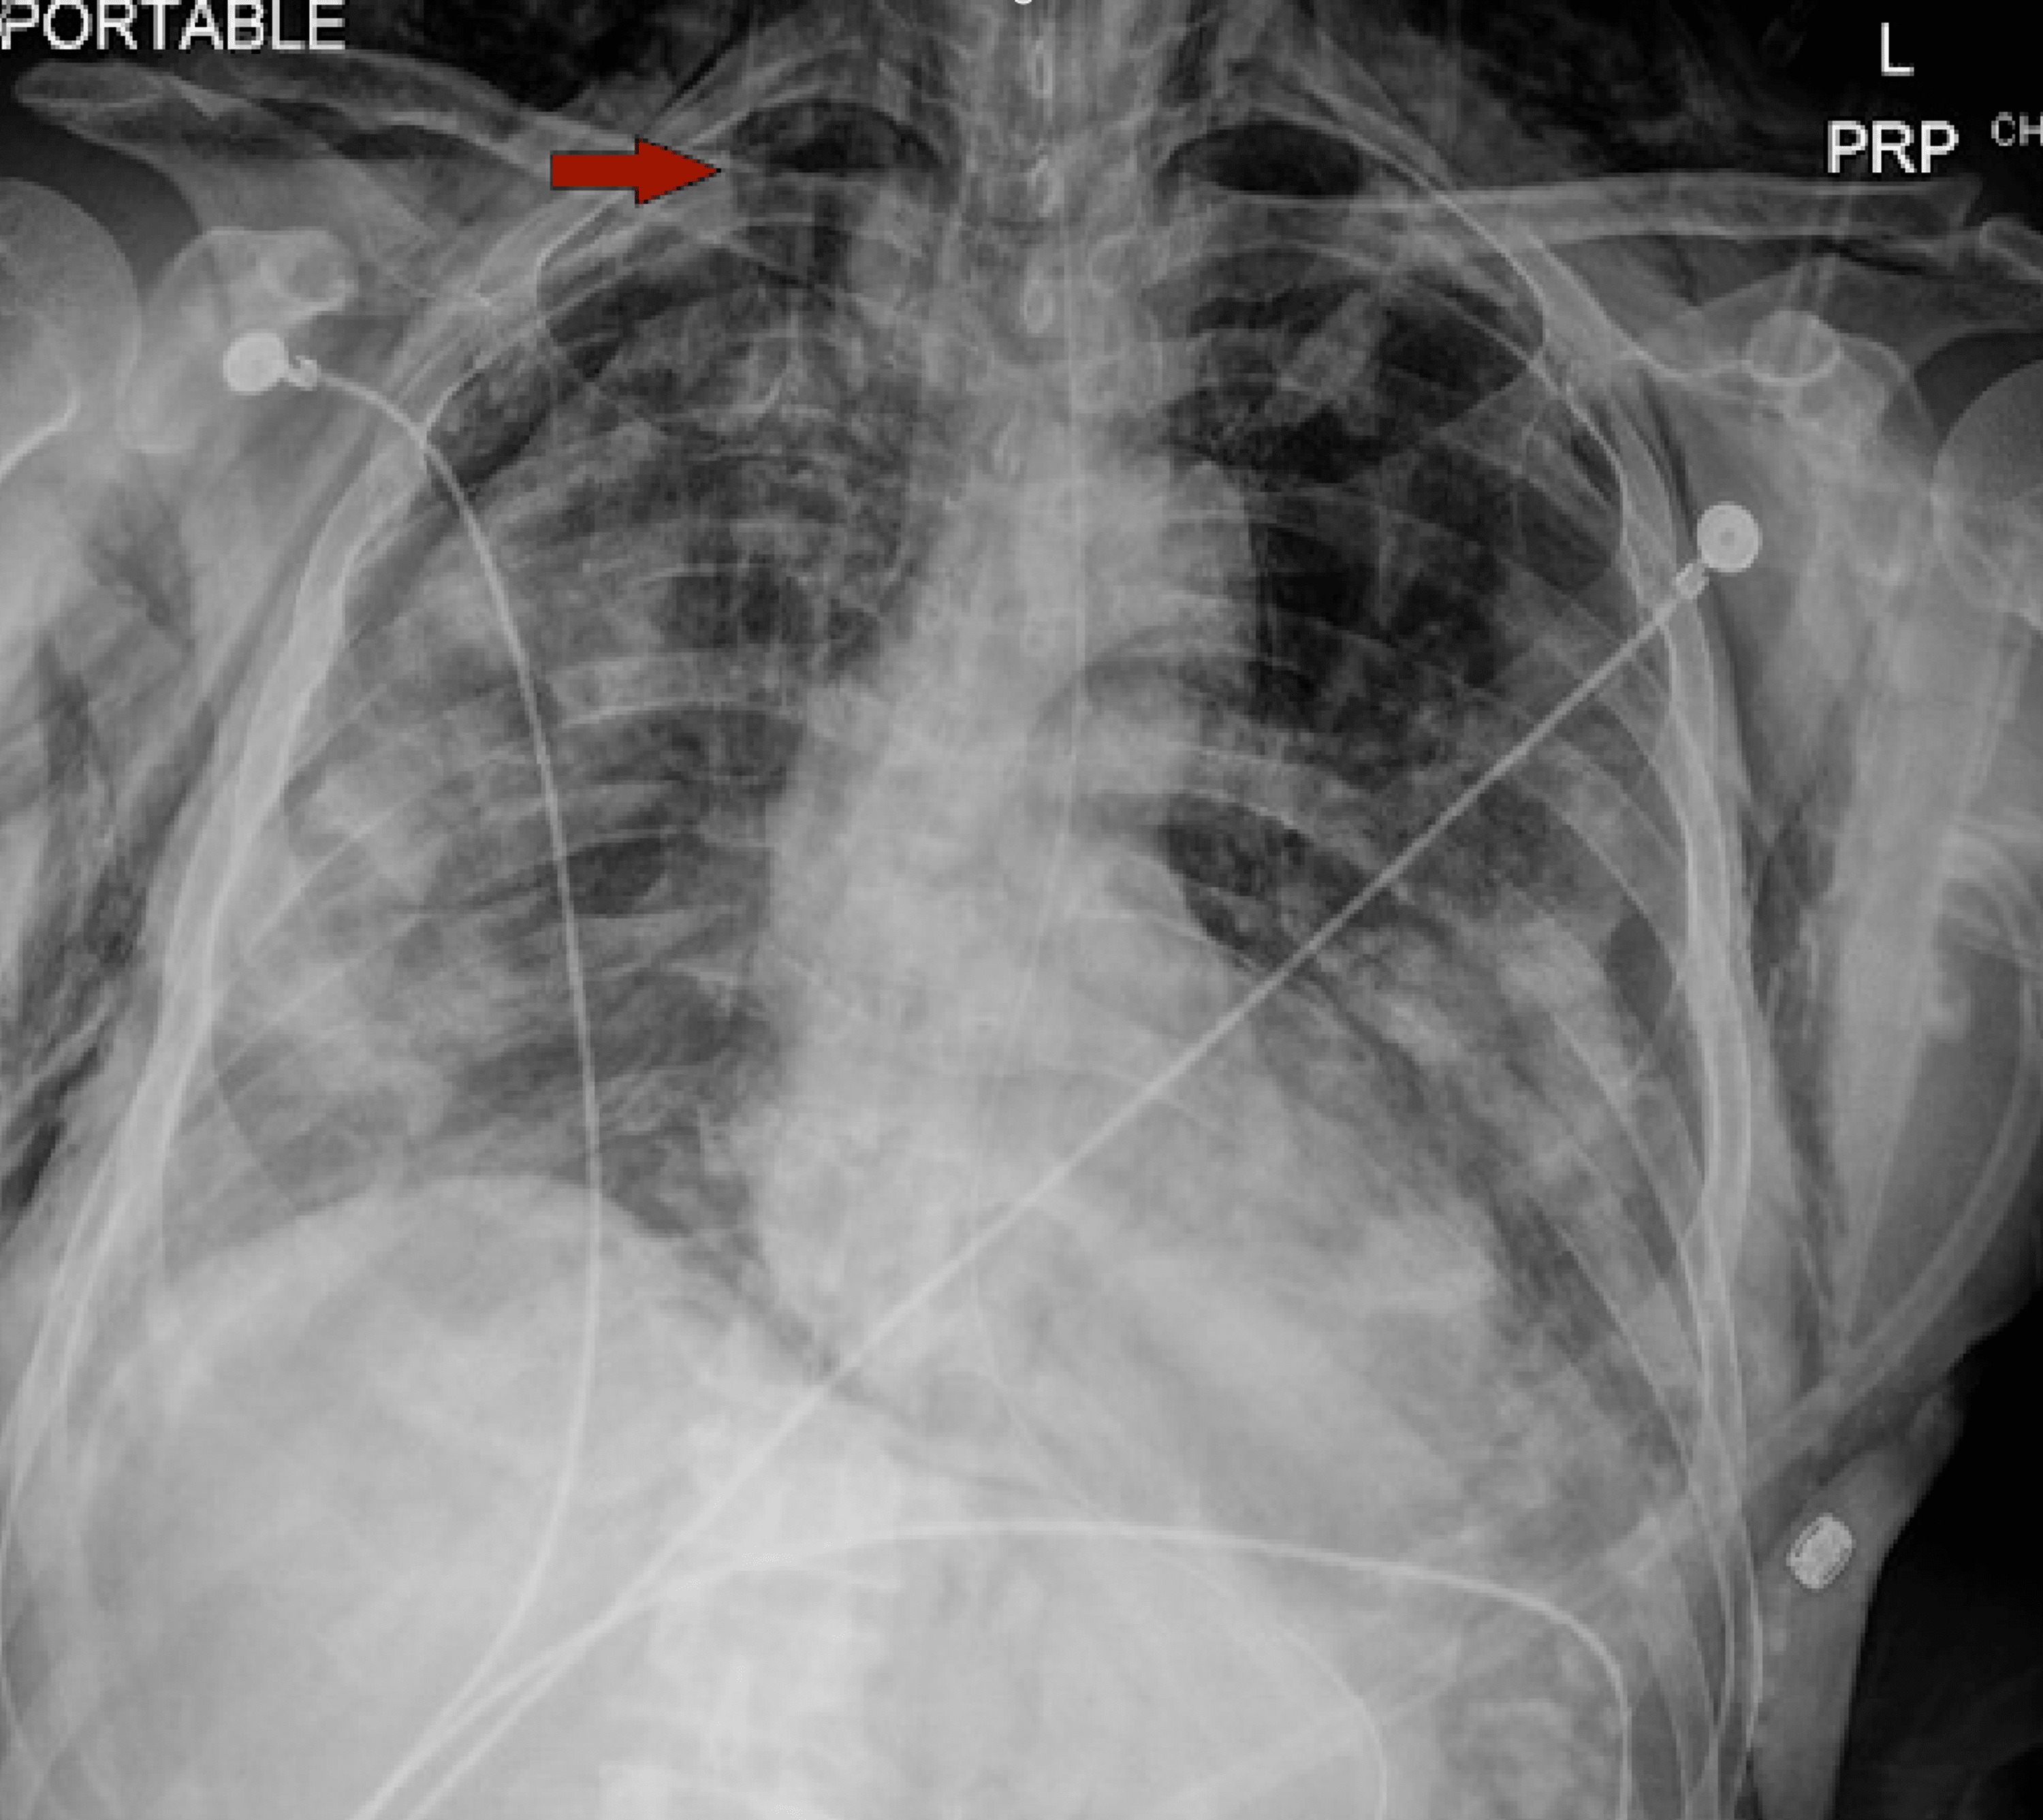 Cureus | Pneumothorax in Intubated Patients With COVID-19: A Case Series